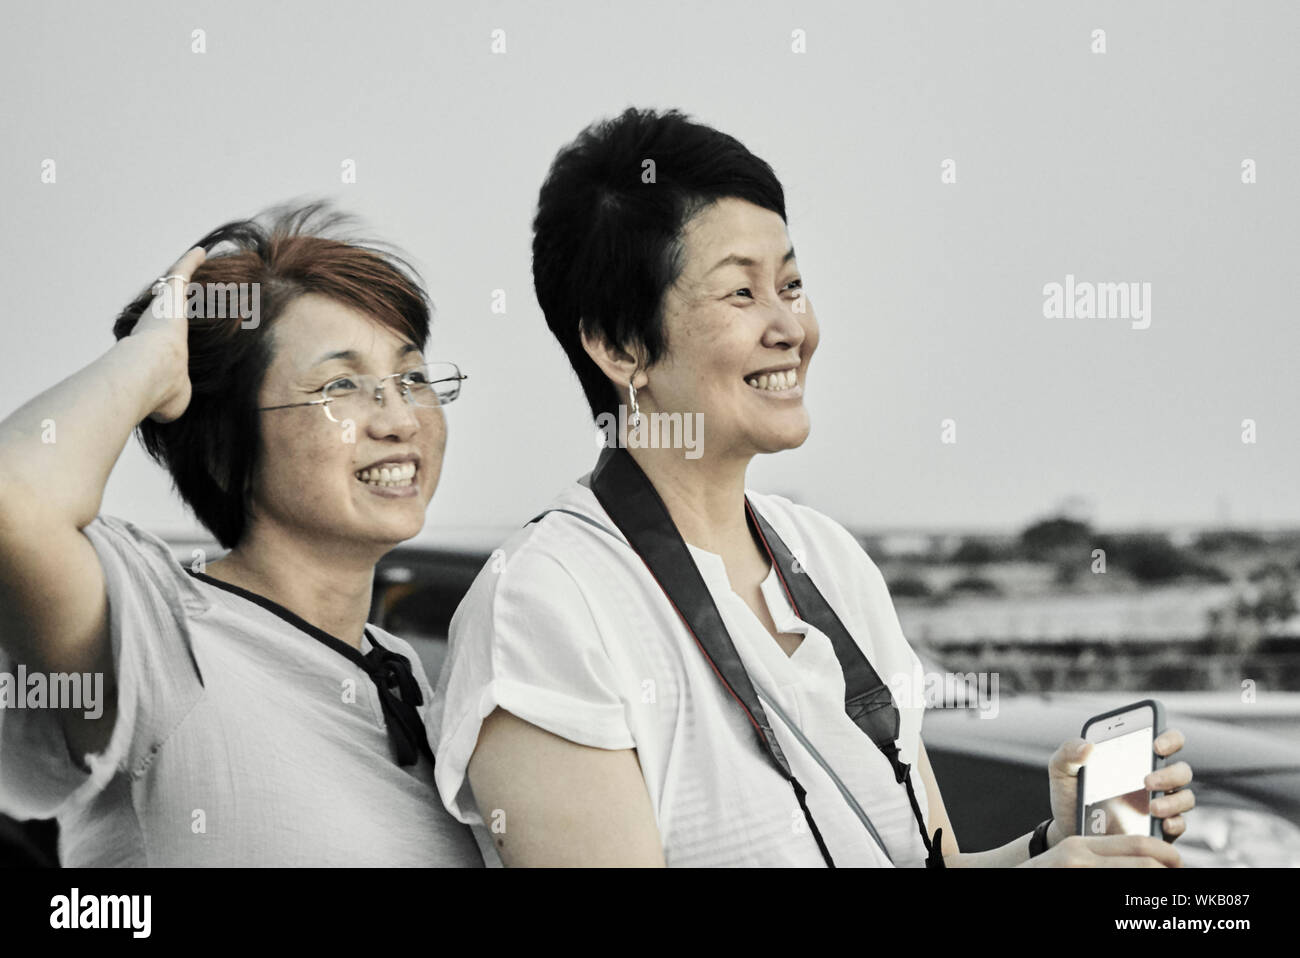 Close-up Of Smiling Mature Women At Beach Stock Photo